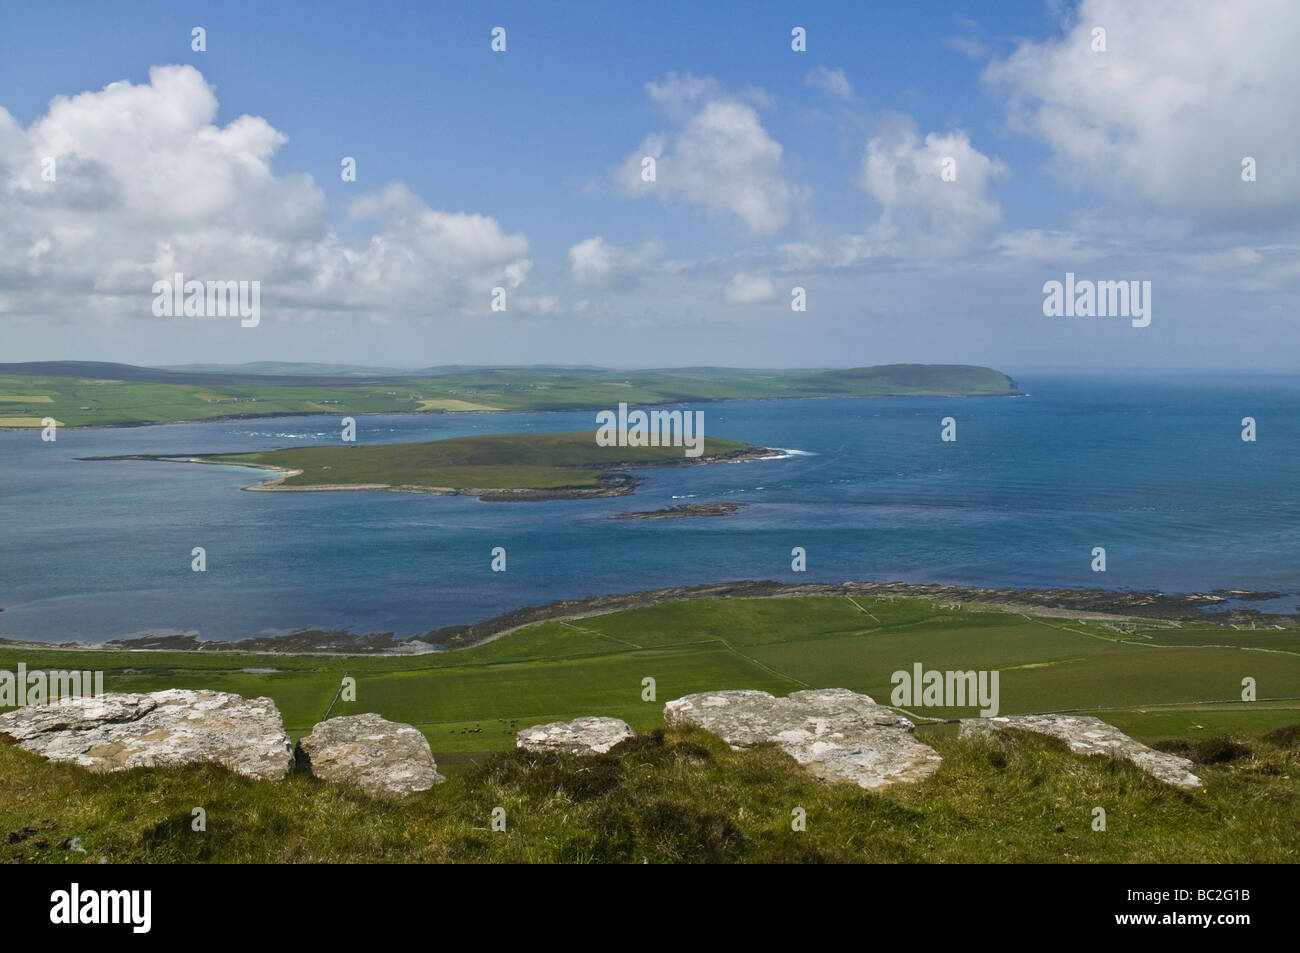 dh Eynhallow Sound ROUSAY ORKNEY Eynhallow island and Evie Orkney Westmainland hills viewpoint sounds Stock Photo